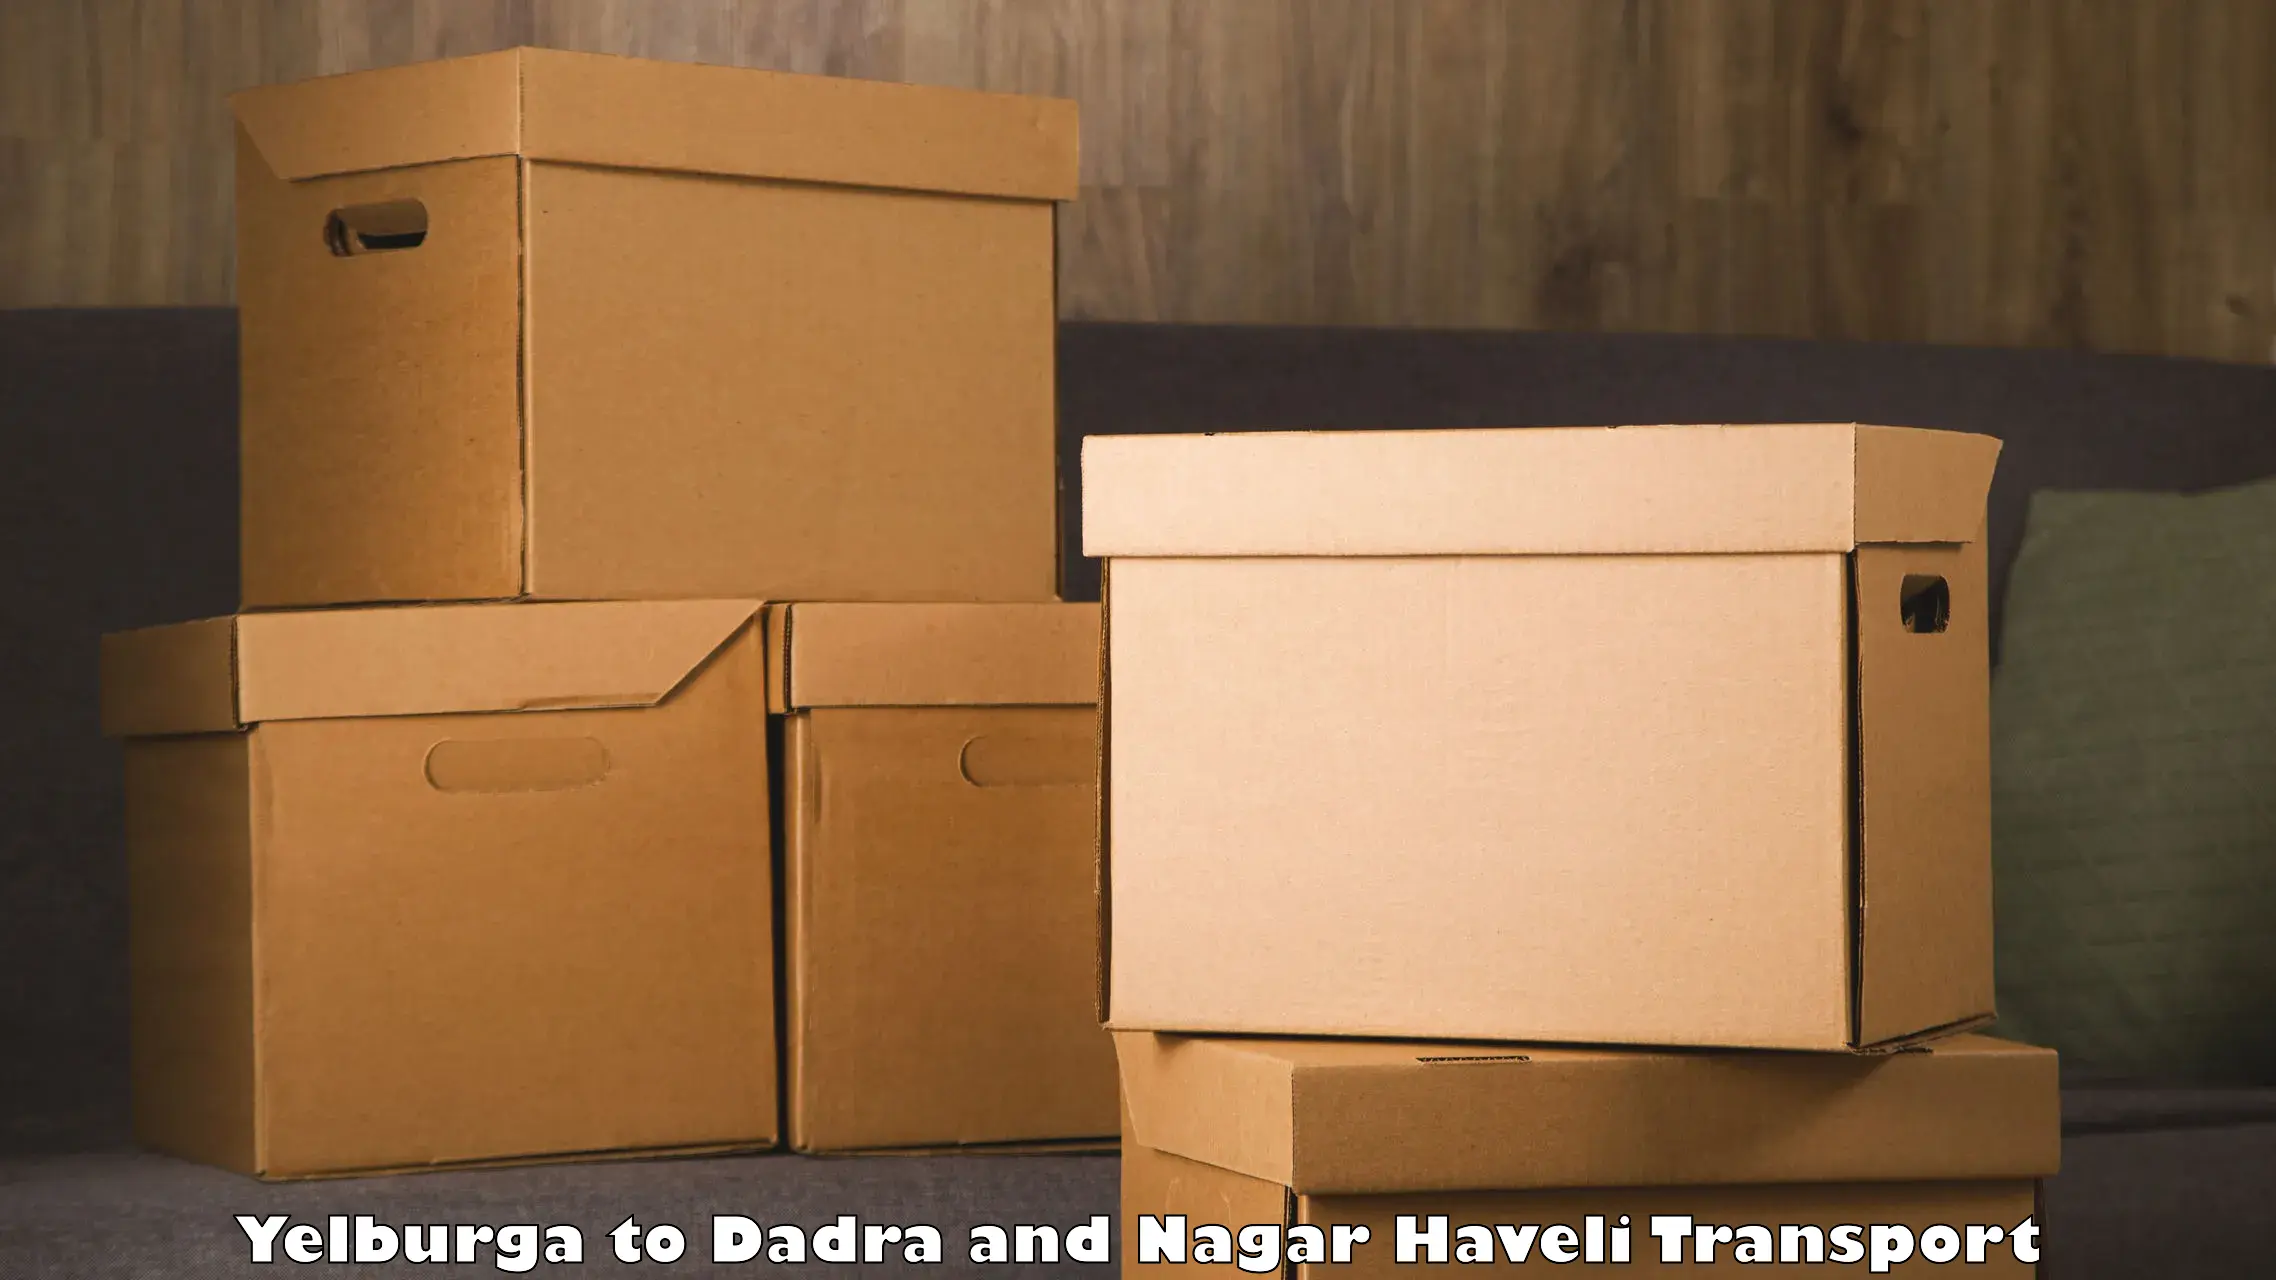 Package delivery services Yelburga to Silvassa